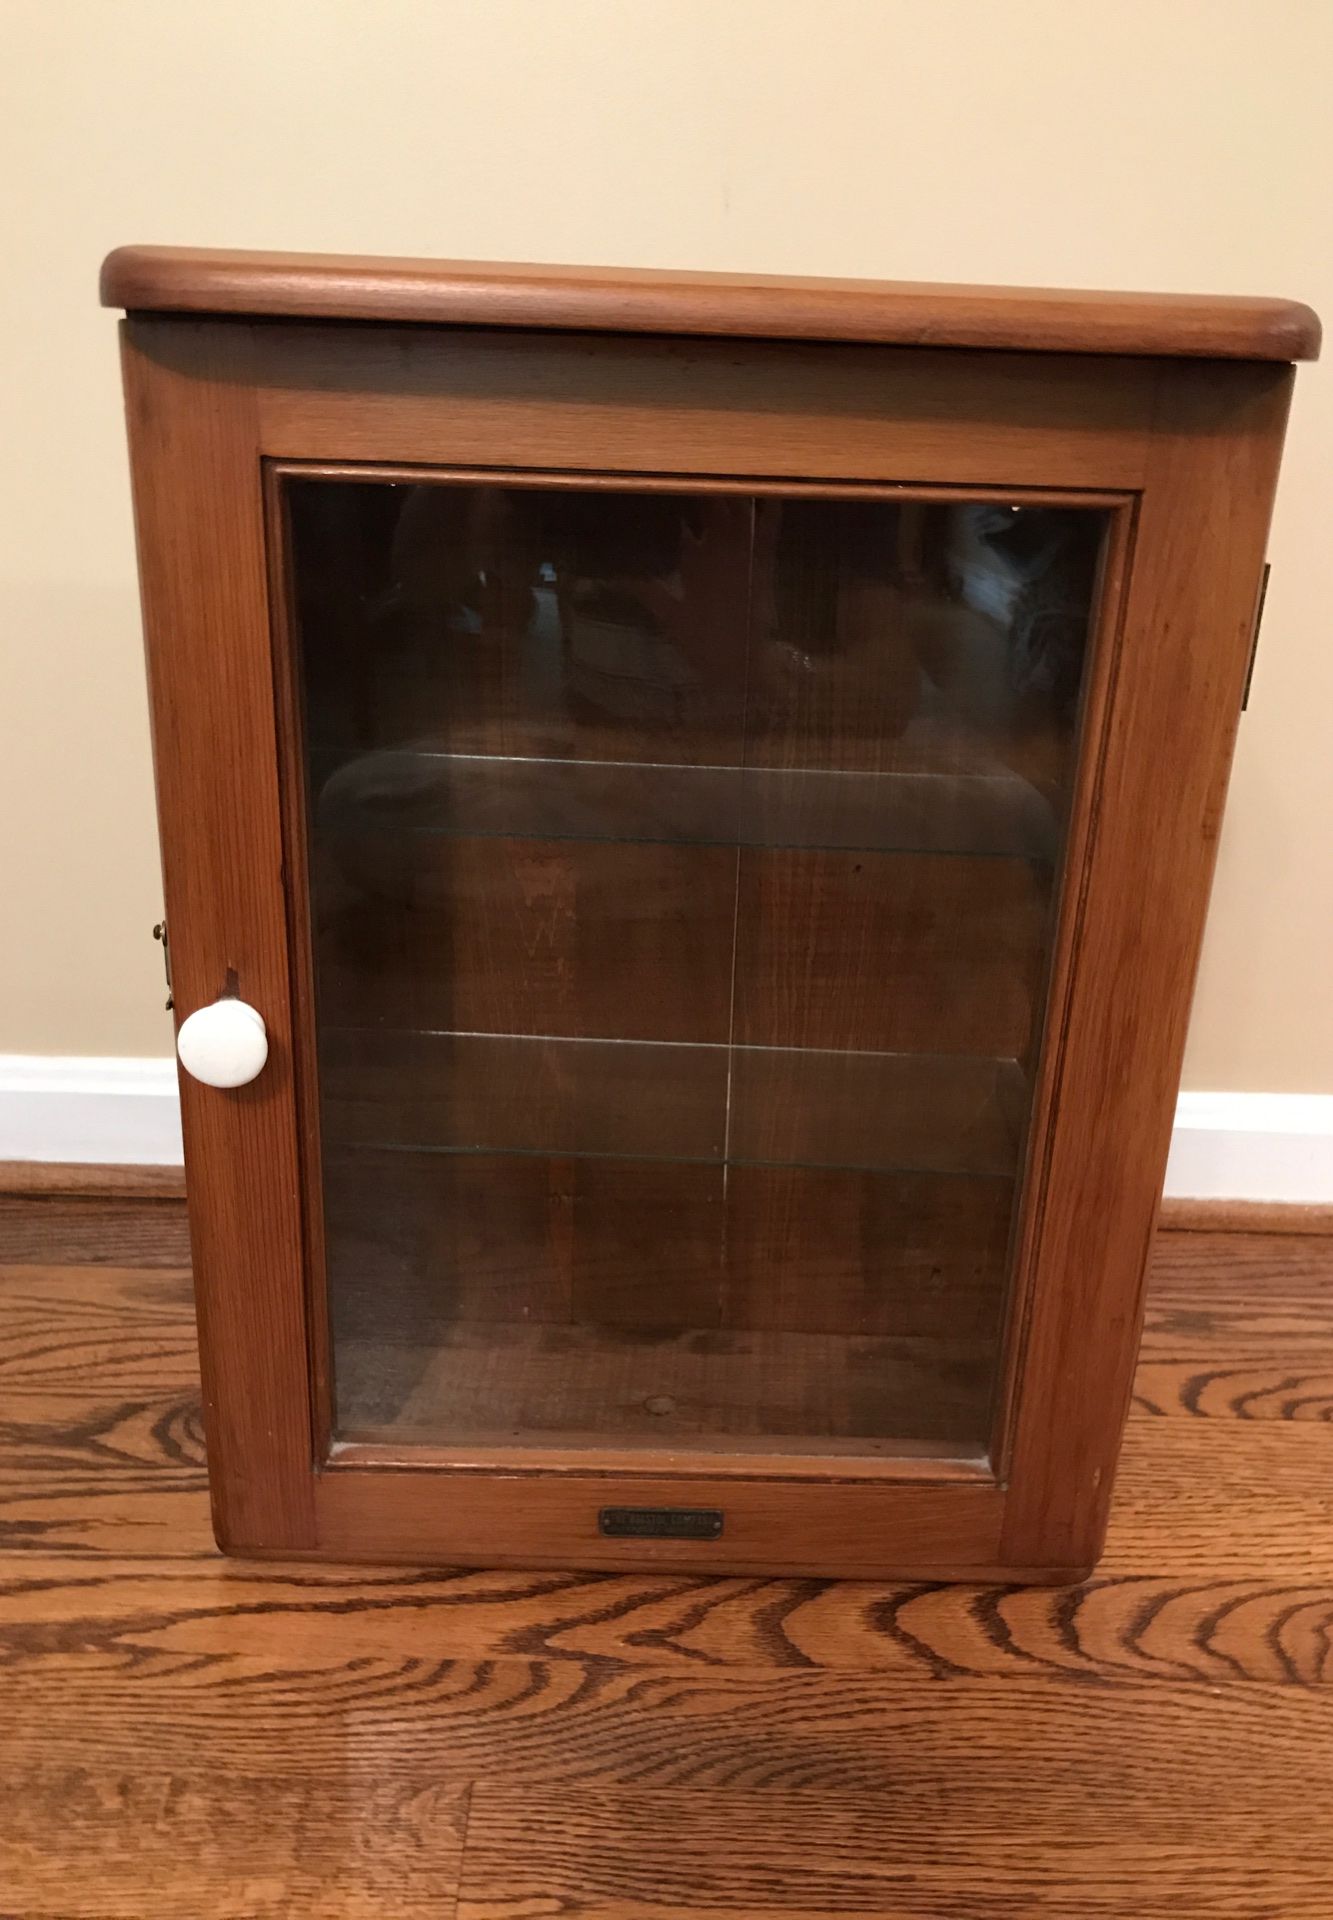 Antique wall mounted cabinet